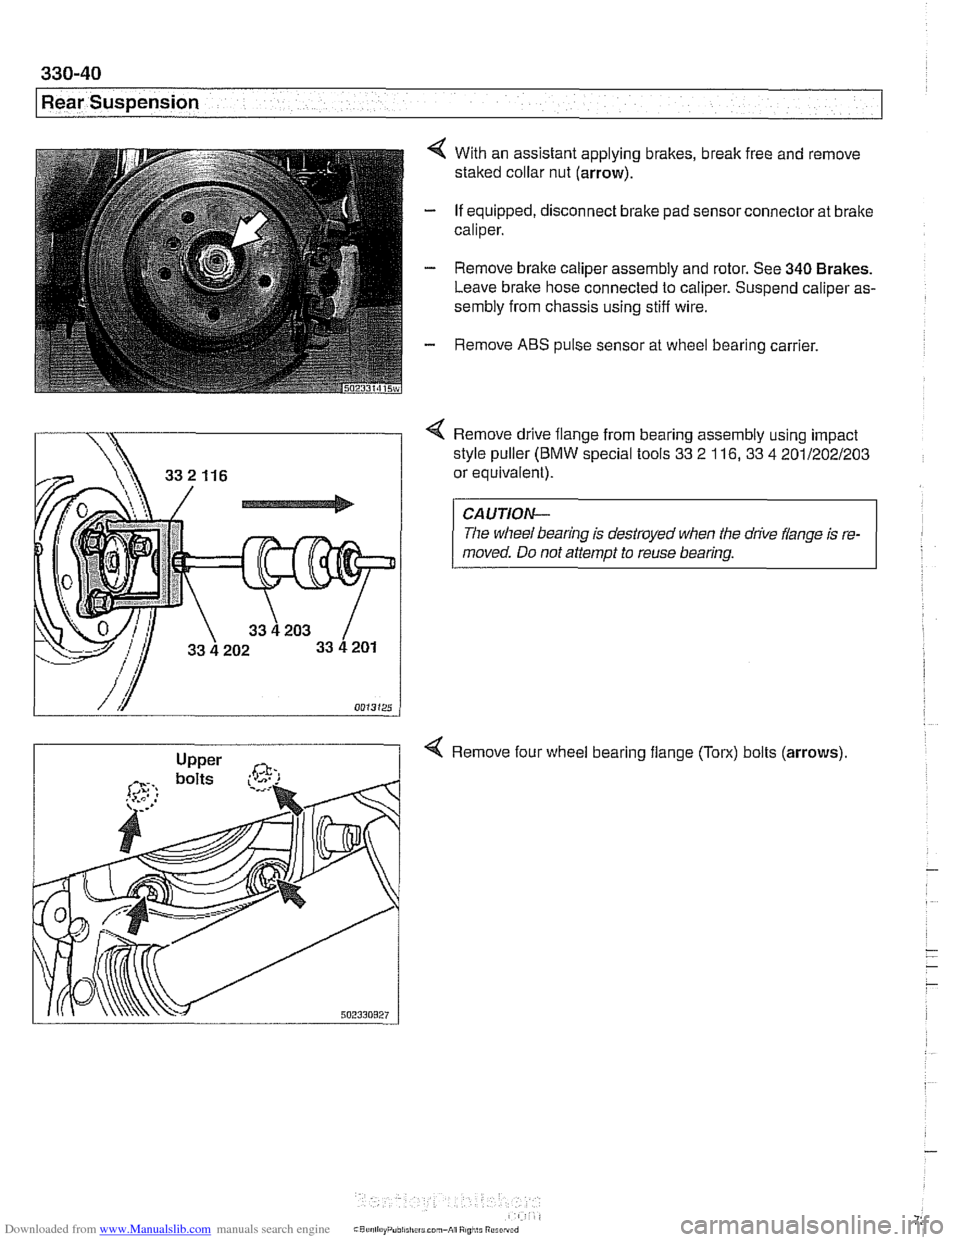 BMW 525i 2001 E39 Workshop Manual Downloaded from www.Manualslib.com manuals search engine 
330-40 
Rear Suspension 
4 With an assistant applying brakes, break free and  remove 
staked  collar nut  (arrow). 
- If equipped,  disconnect